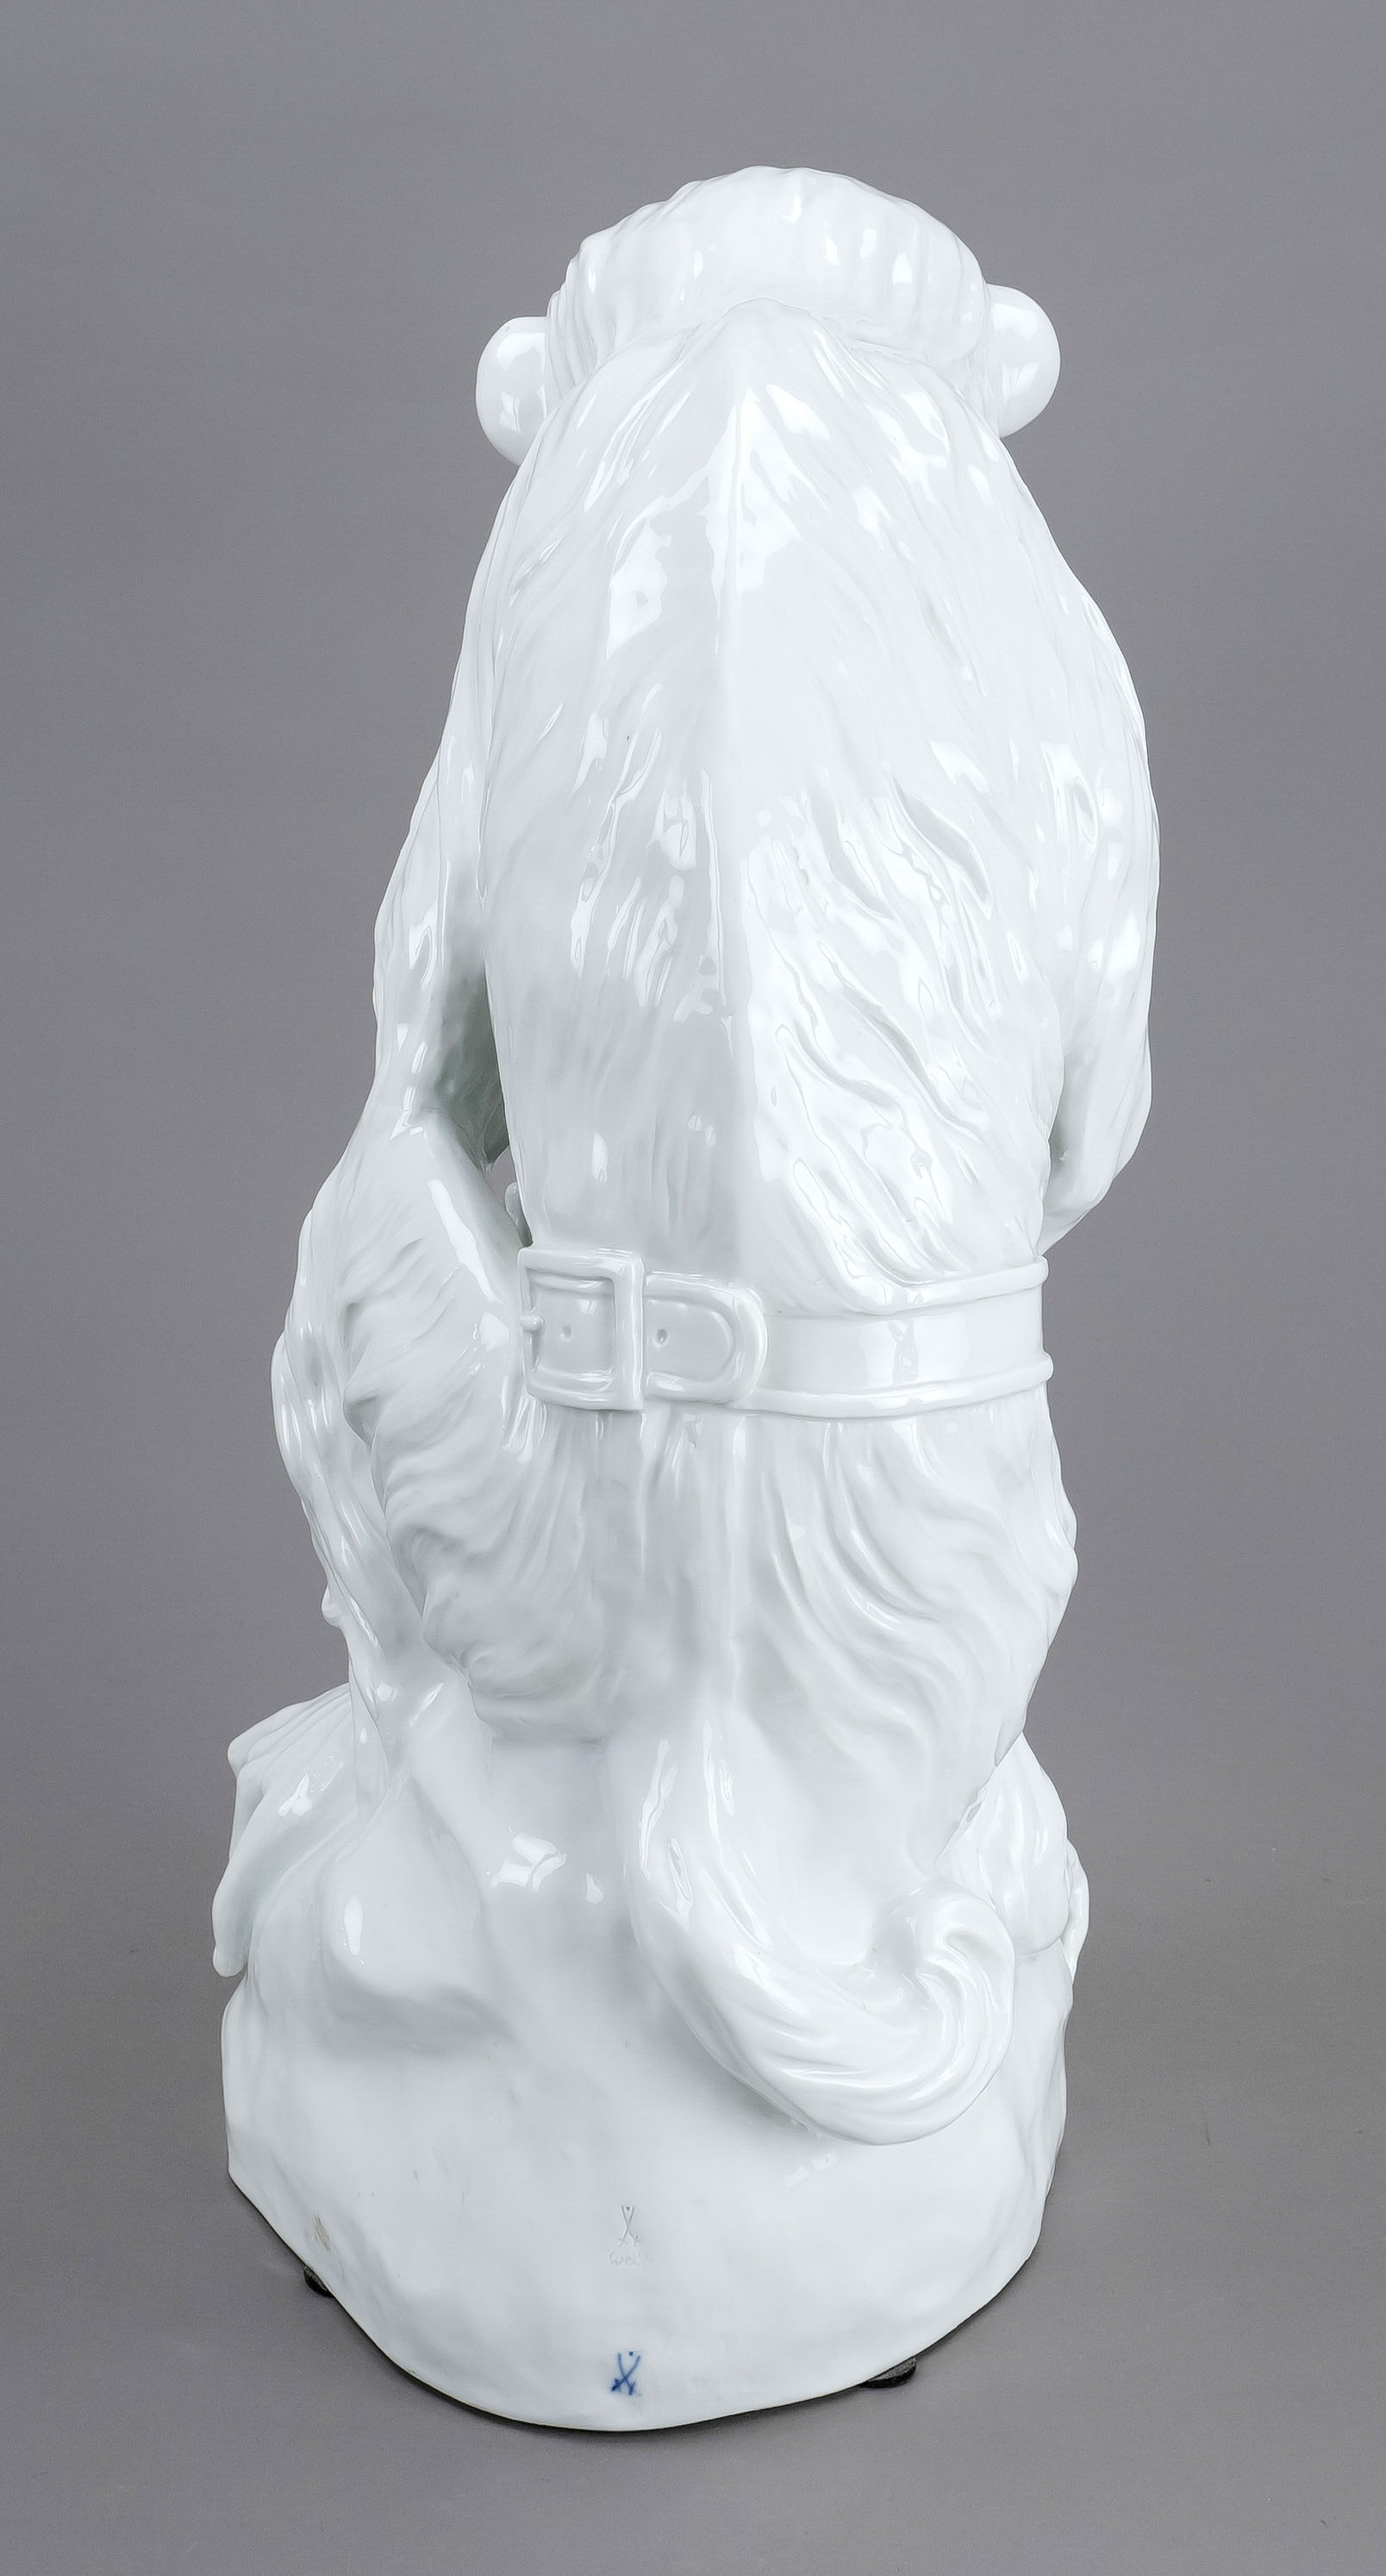 Monkey with young boy, Meissen, mark 1924-1934, designed by Johann Gottlieb Kirchner, model no. - Image 3 of 4